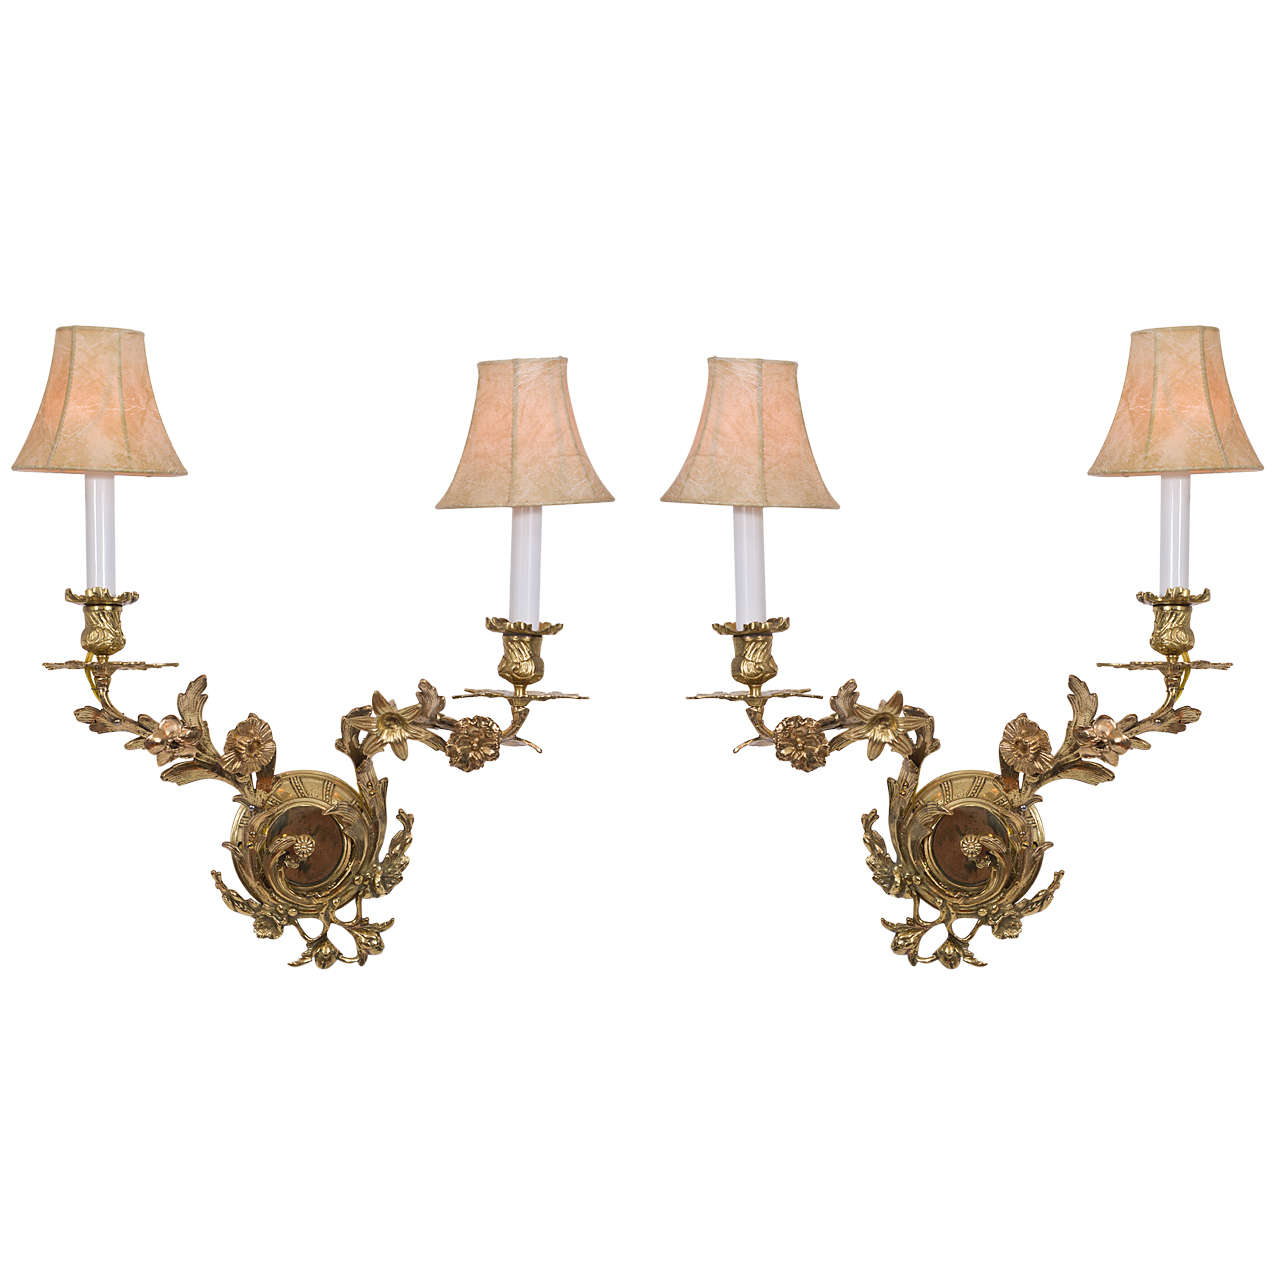 Two Light Sconces For Sale